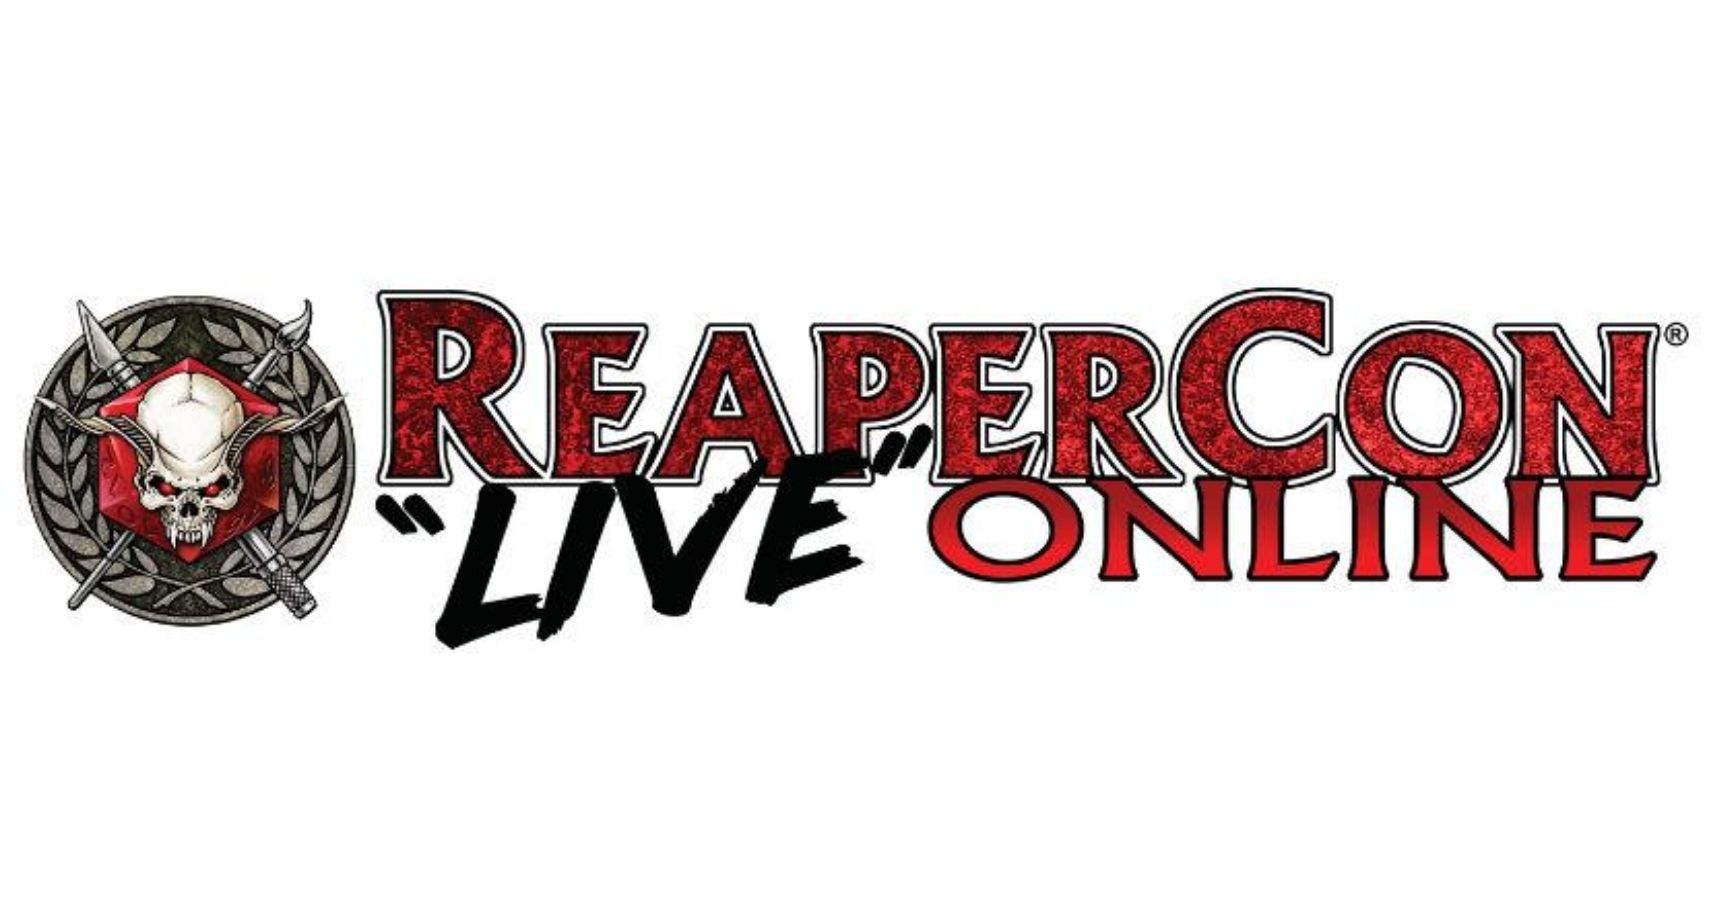 ReaperCon Live Online feature image